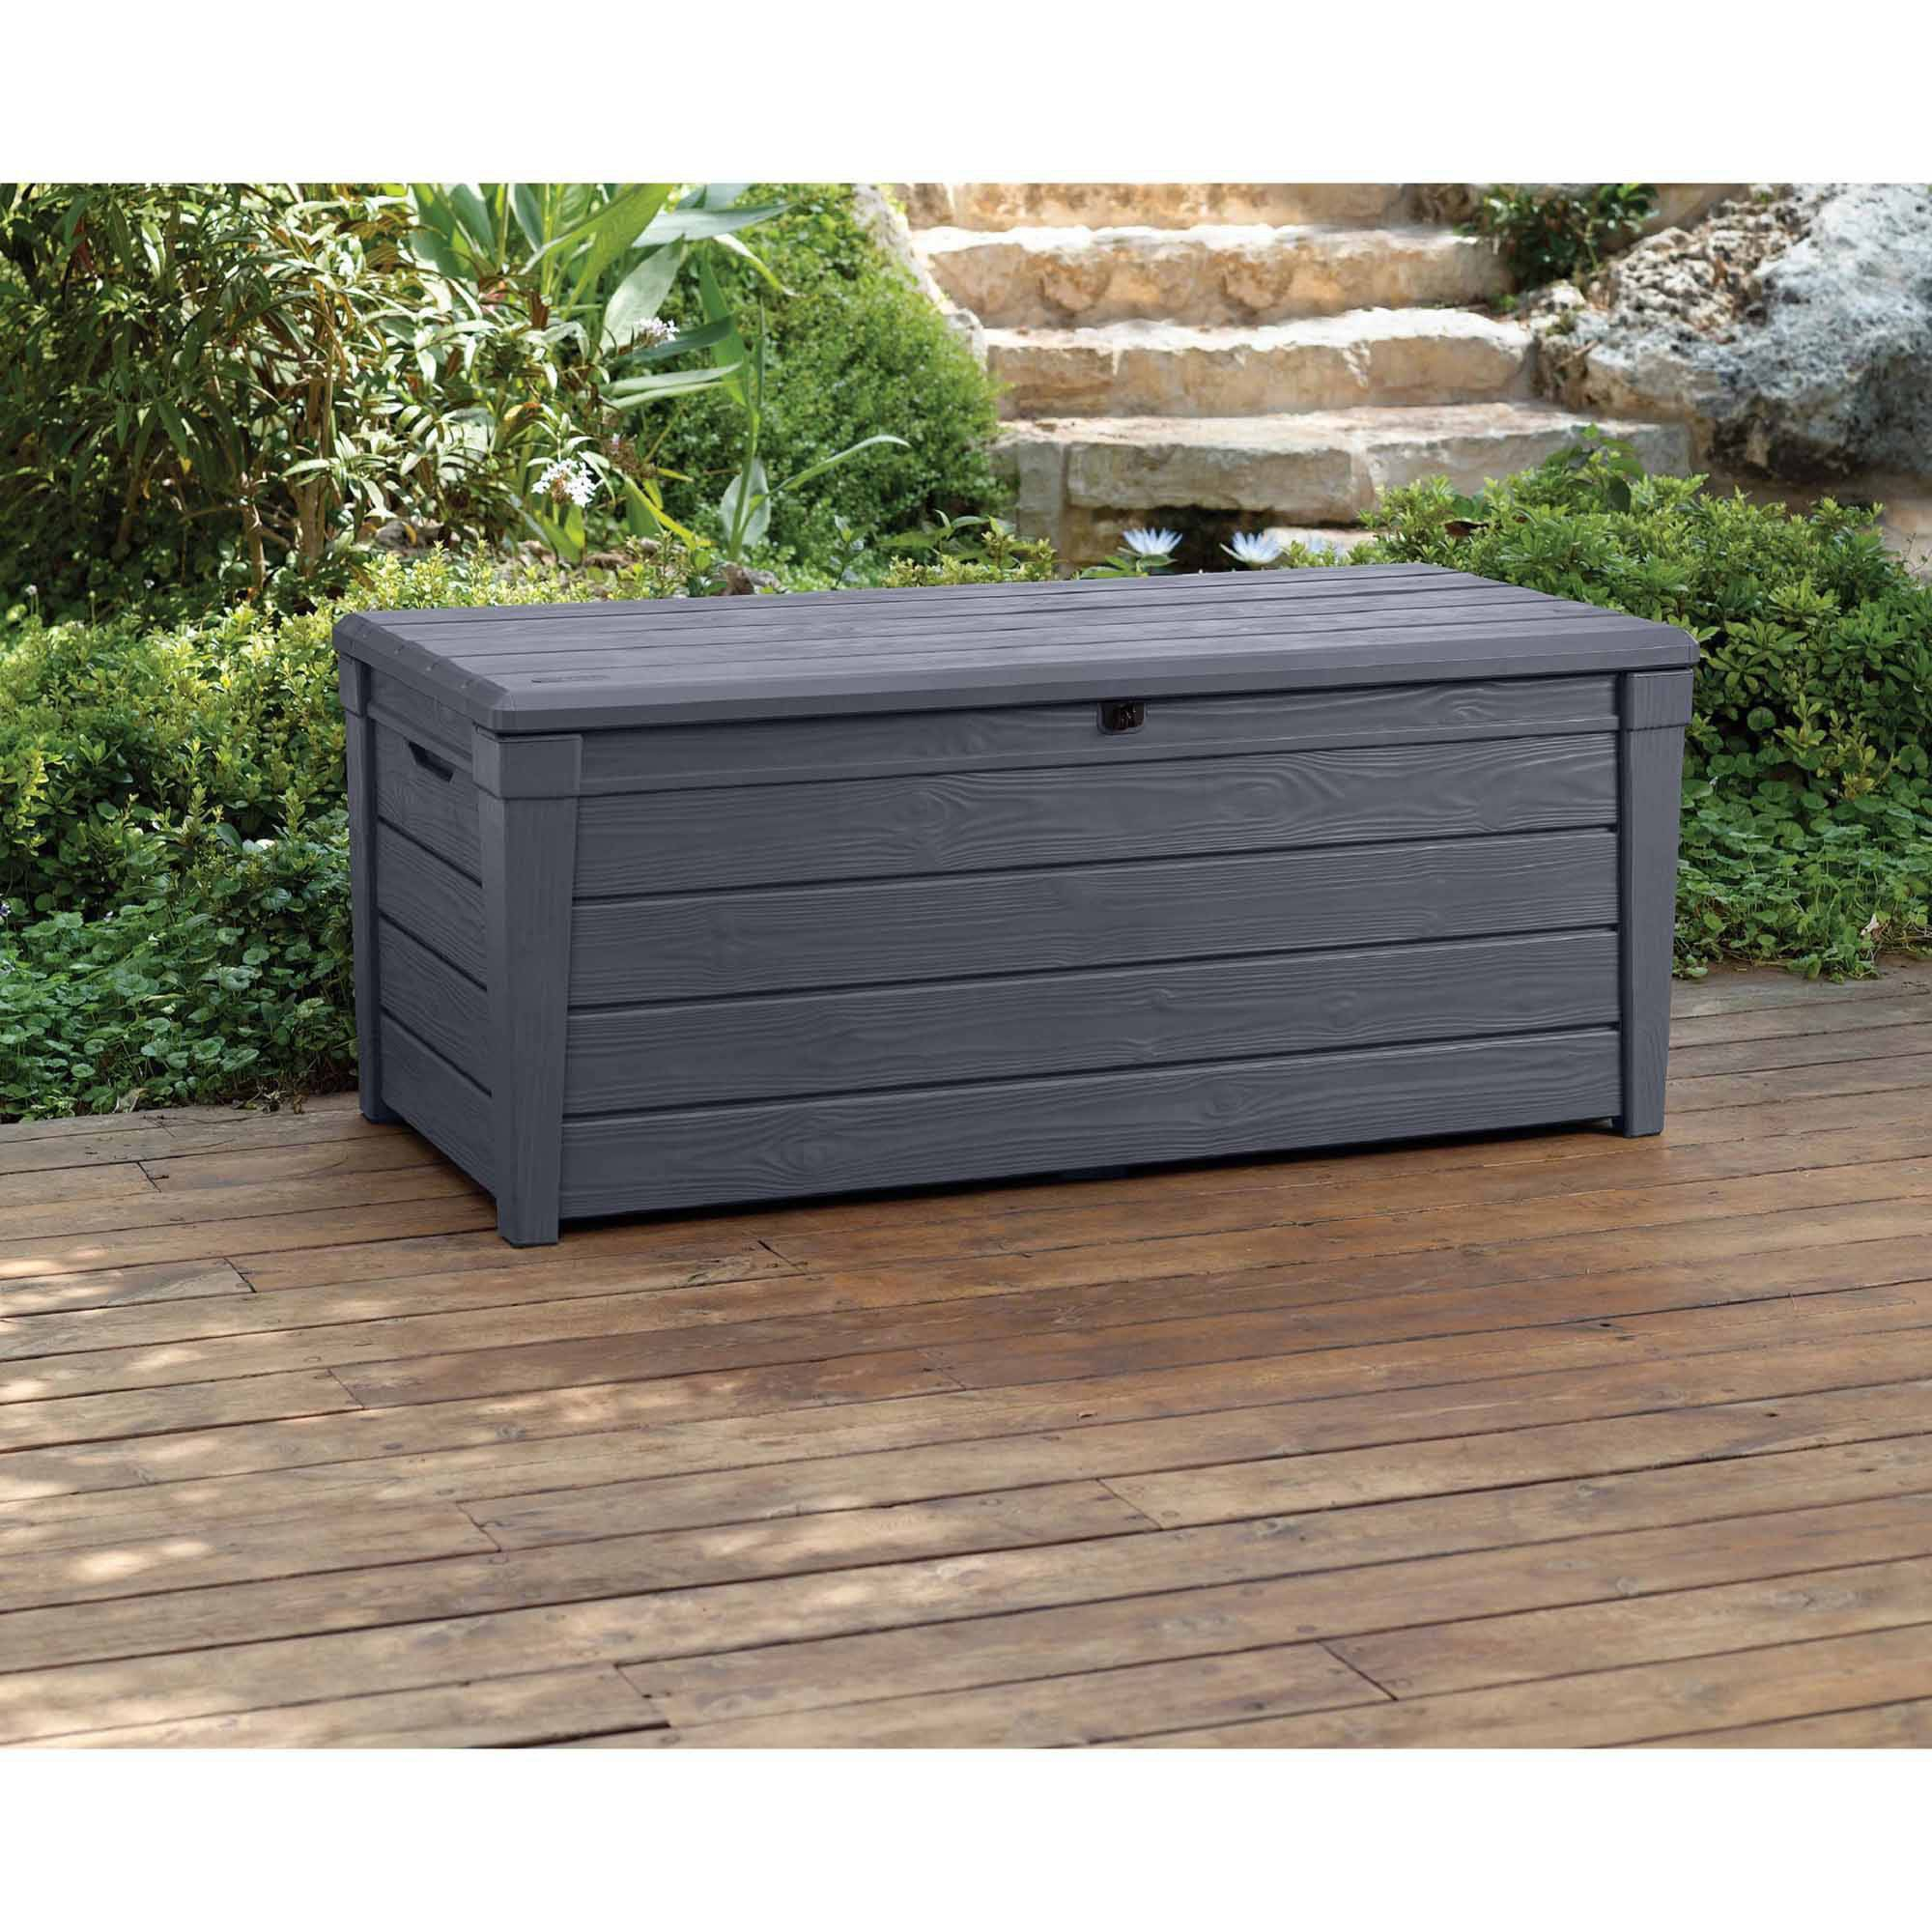 Furniture Attractive Water Resistant Plastic Deck Storage Bench within sizing 2000 X 2000